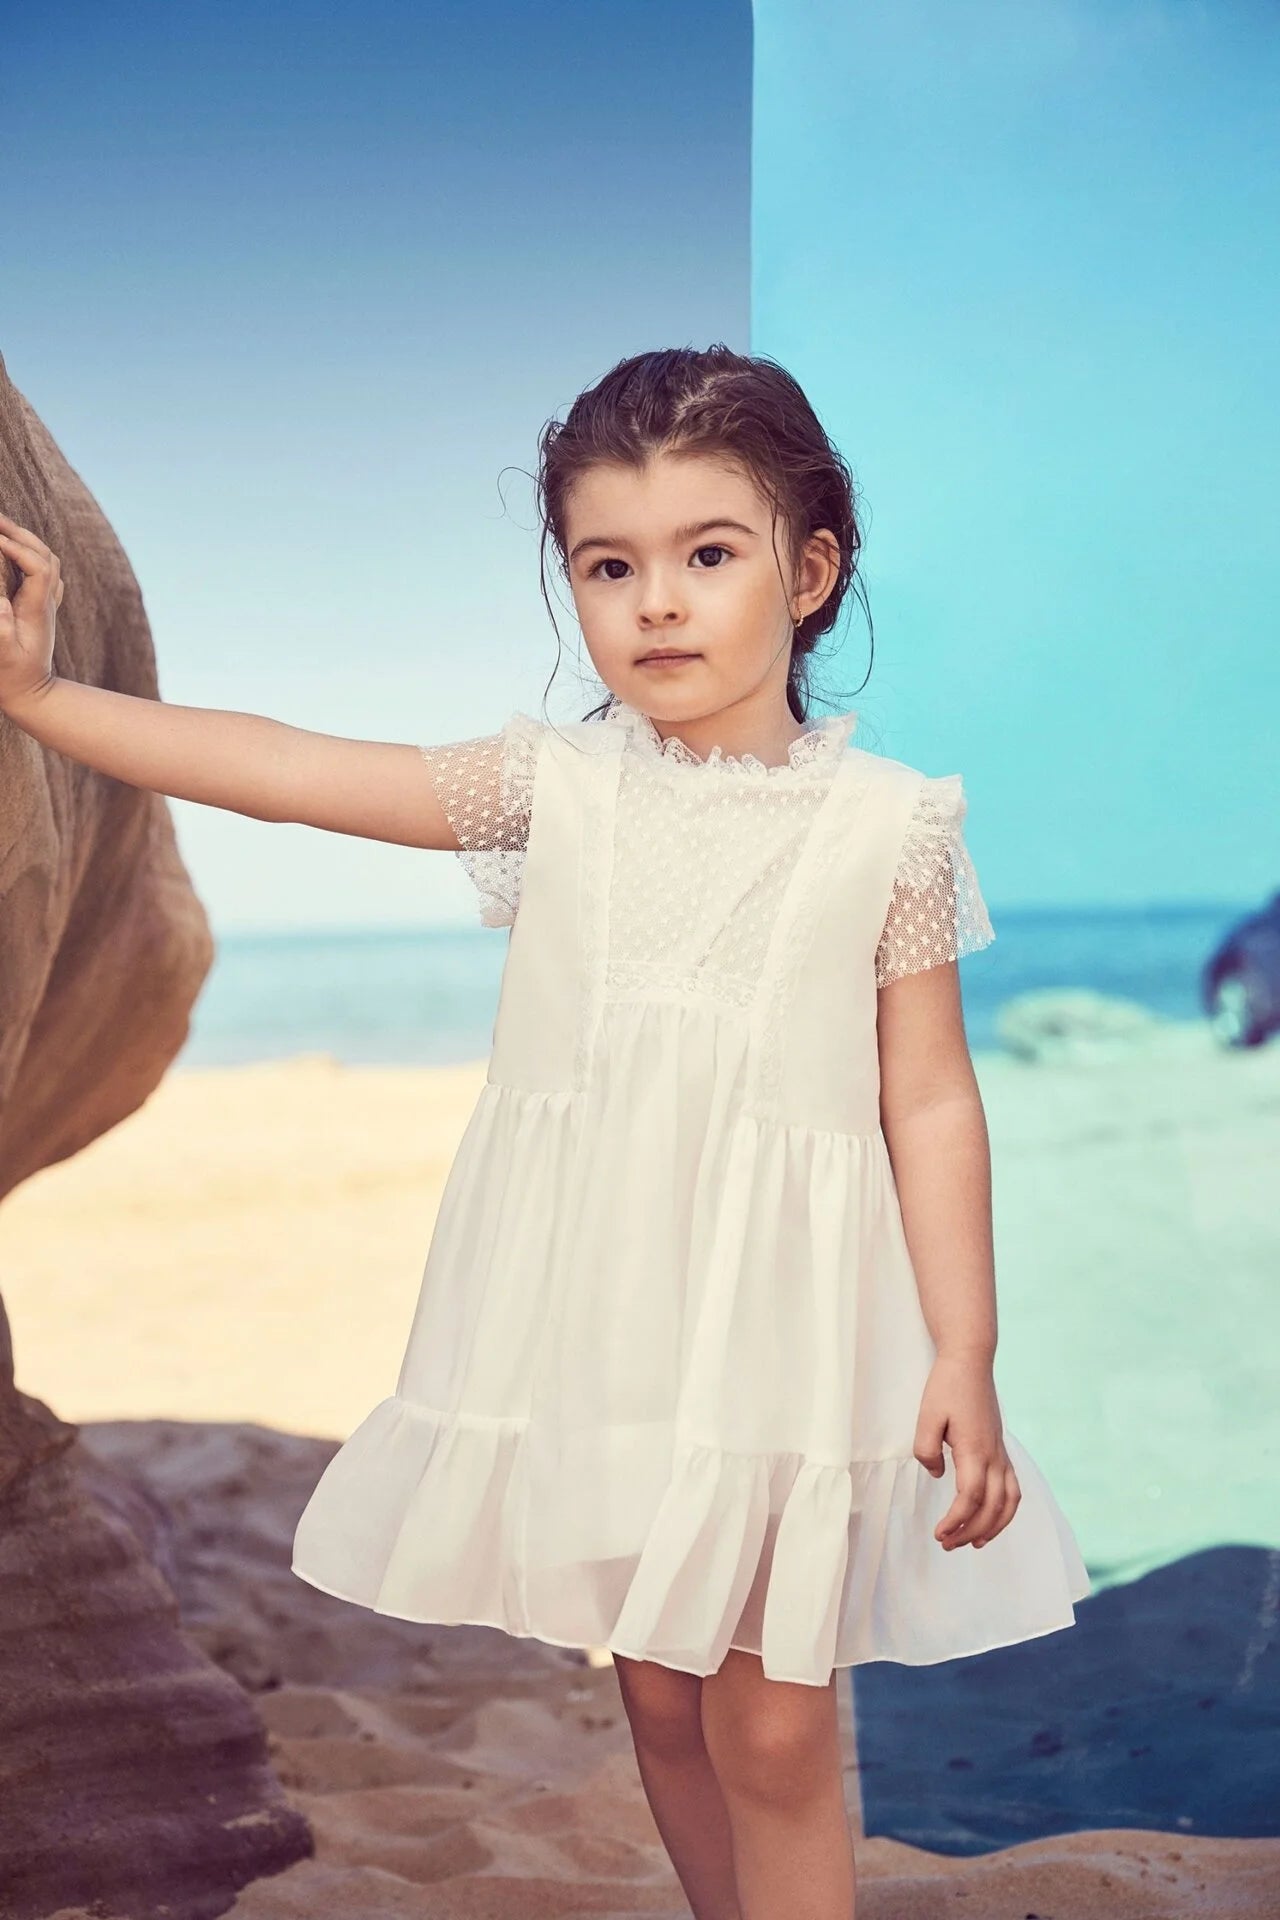 White Dress with Embroidered Tulle - White Dress with Embroidered Tulle - 1 Year - Lia Lea - Melymod